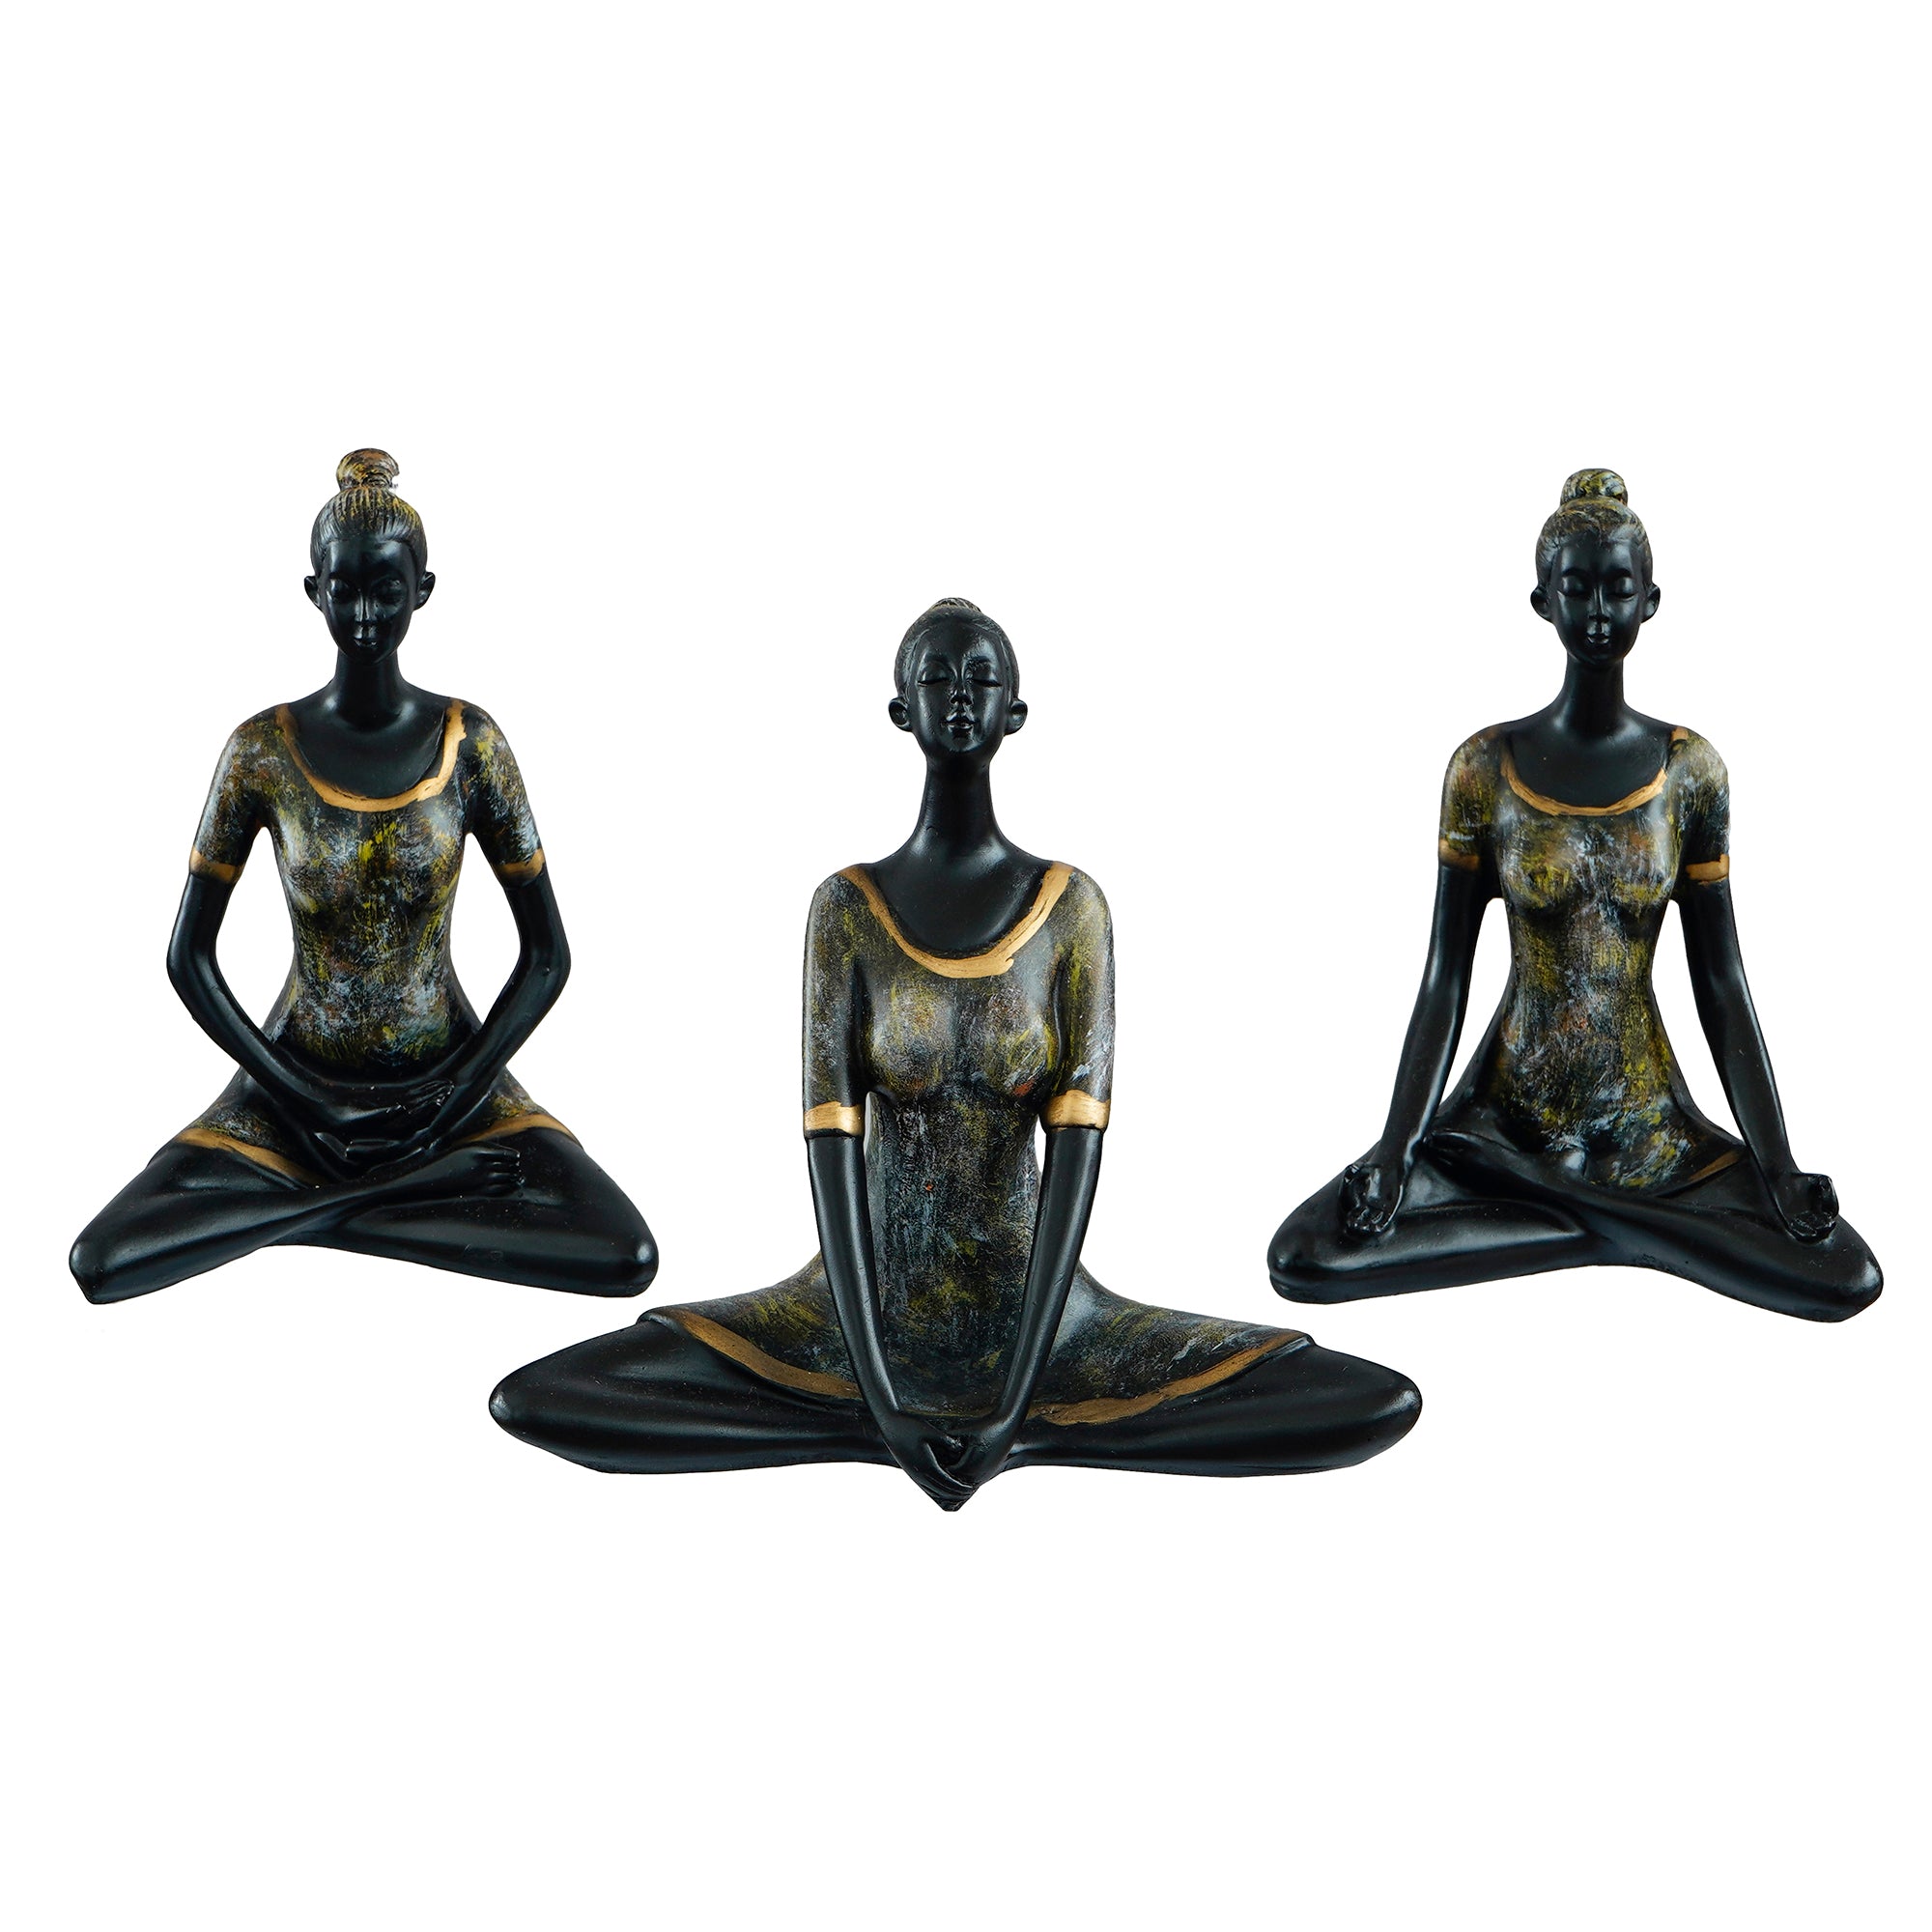 Set of 3 Ladies in Sukhasana, Padmasana, Butterfly Yoga Poses Handcrafted Decorative Polyresin Showpieces 2